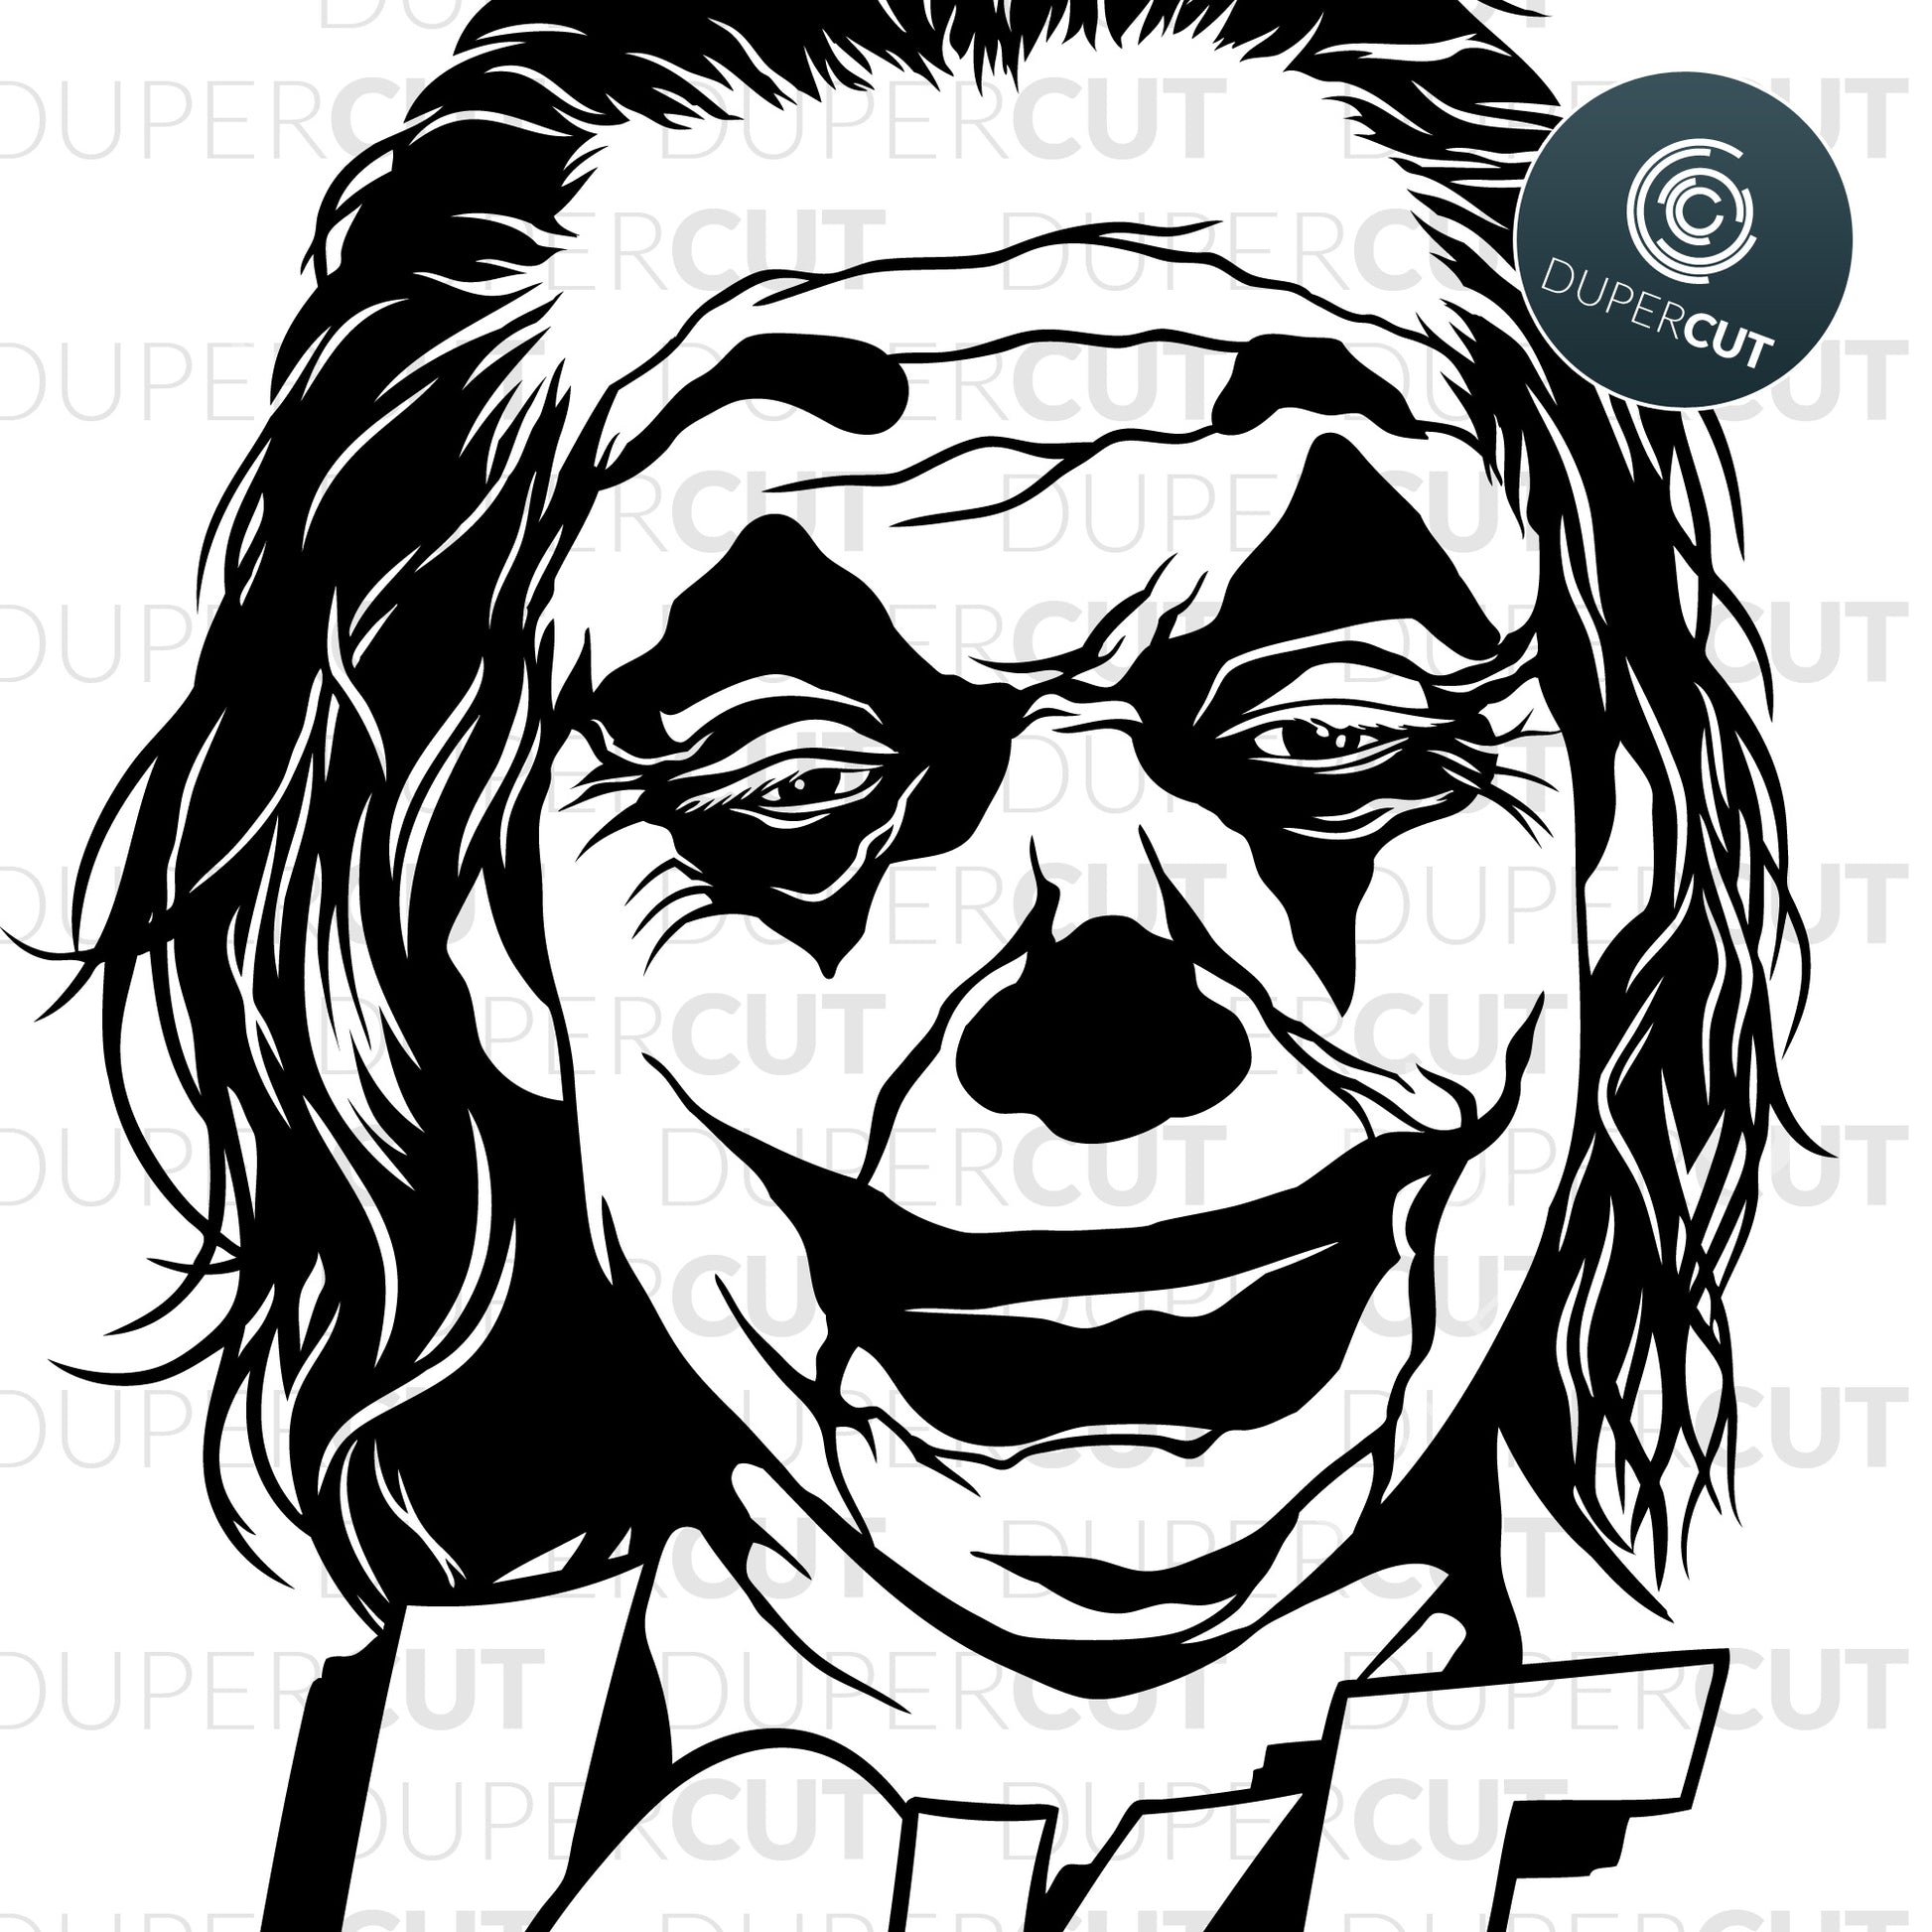 Joker movie line drawing art, Paper cutting template for commercial use. SVG files for Silhouette Cameo, Cricut, Glowforge, DXF for CNC, laser cutting, print on demand